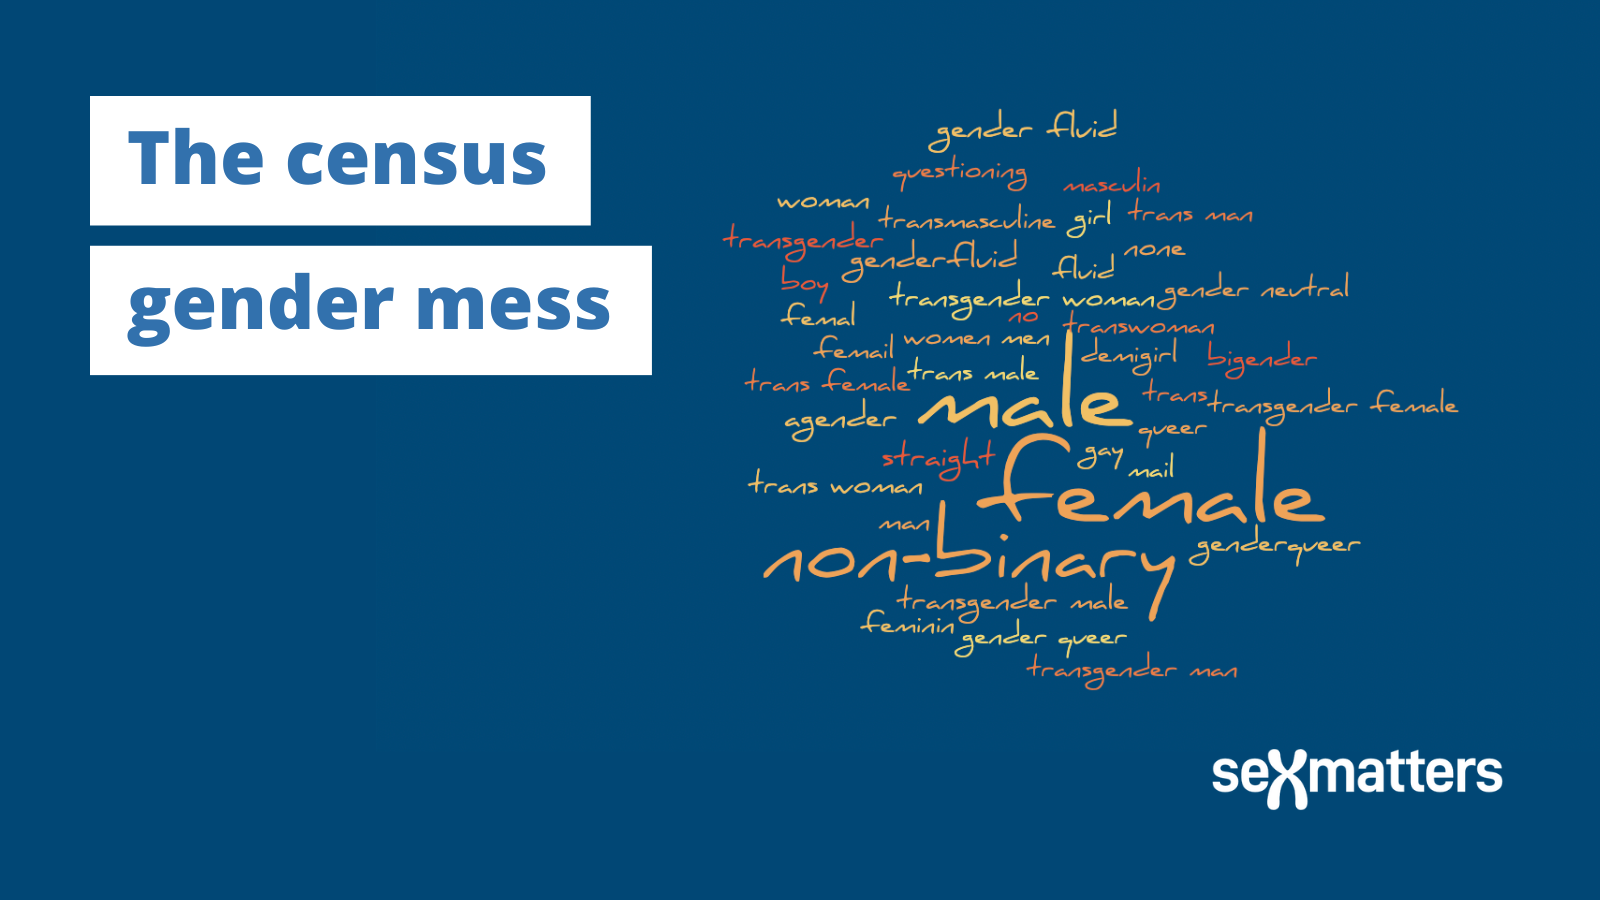 The census gender mess